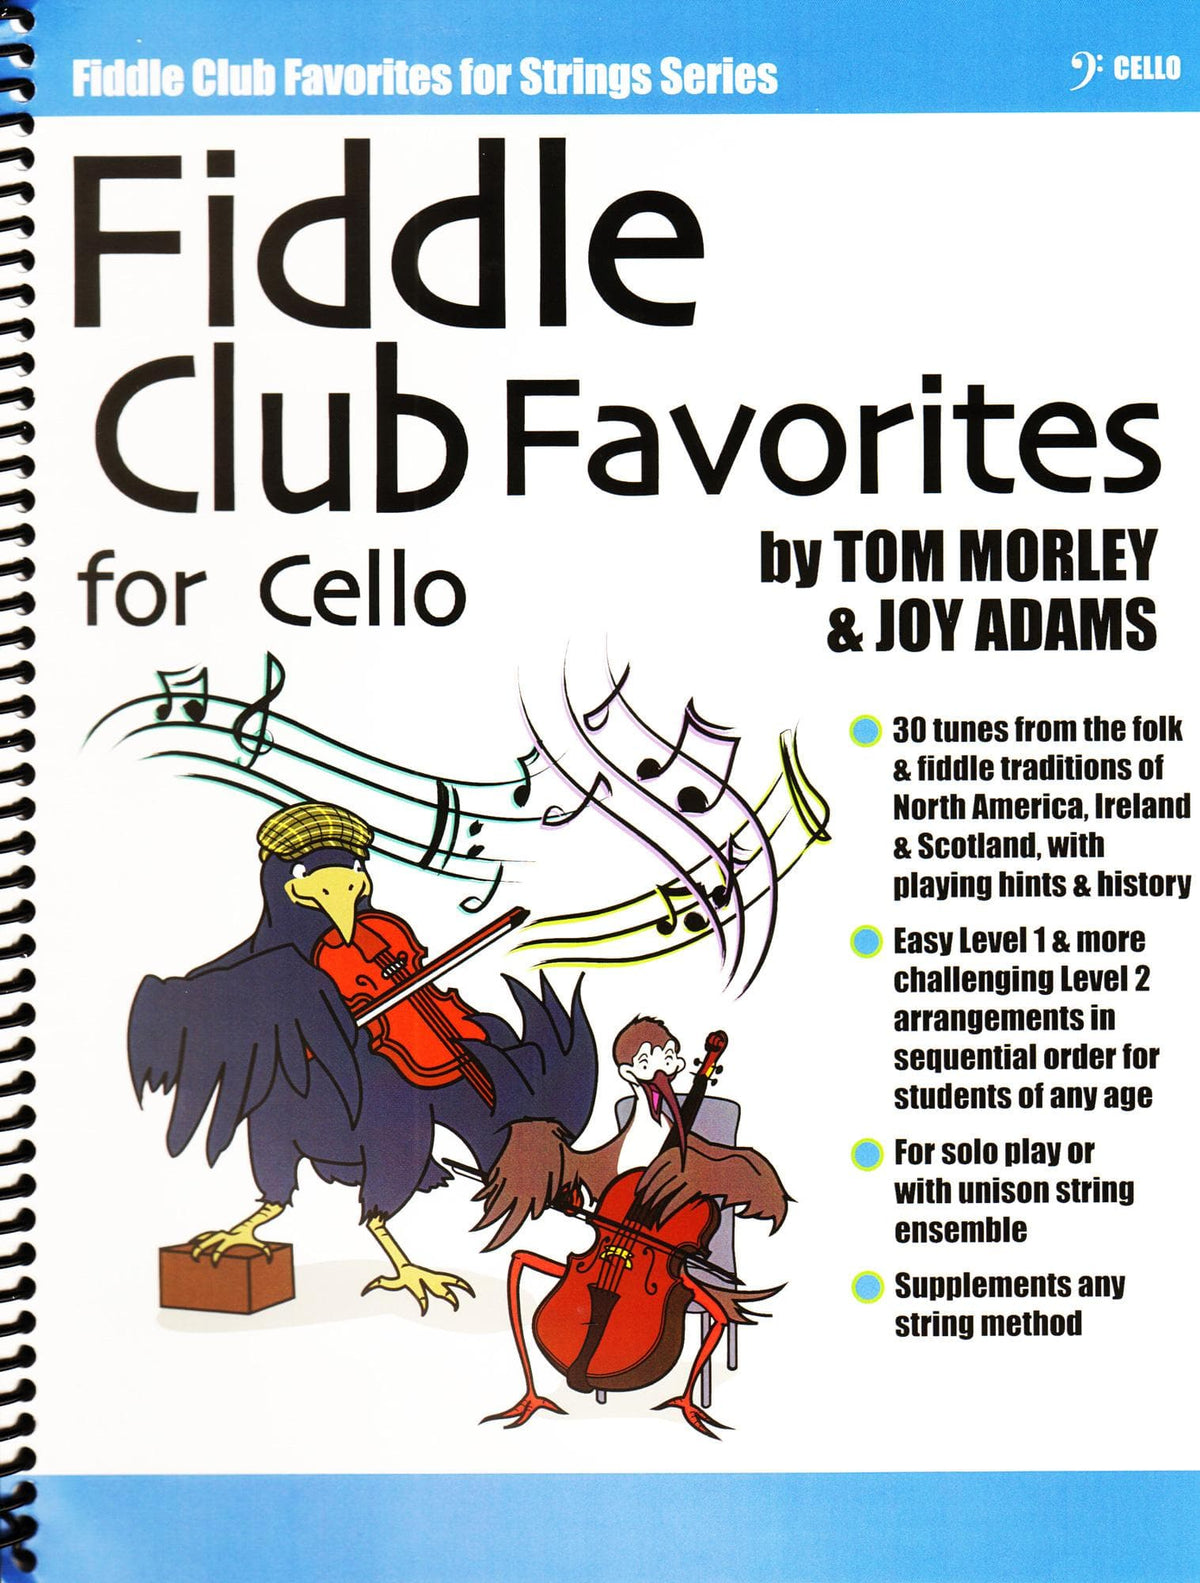 Tom Morley & Joy Adams - Fiddle Club Favorites - for Cello - by Flying Frog Music